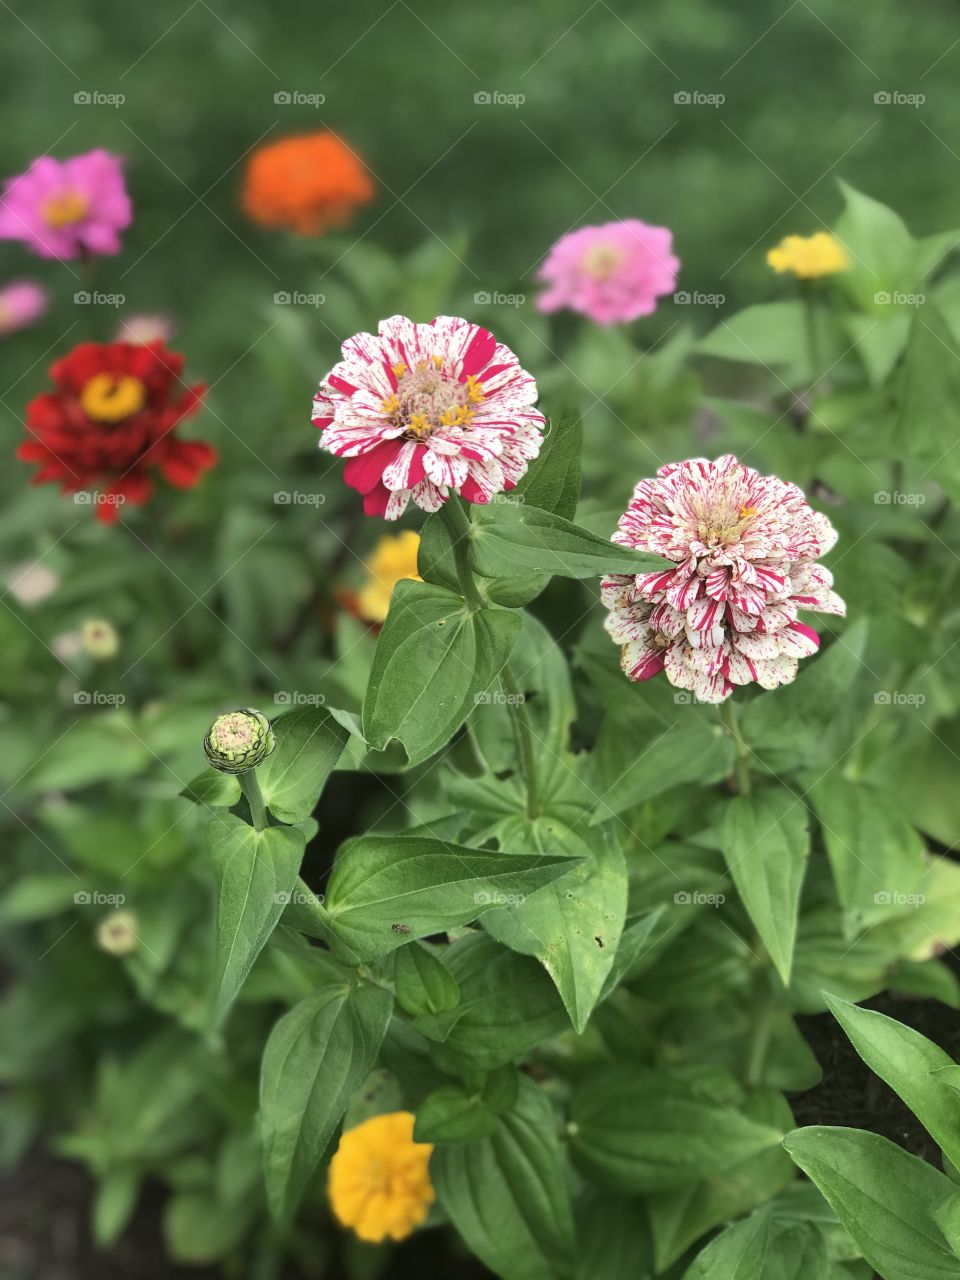 Gorgeous blooms on striped peppermint zinnias! 